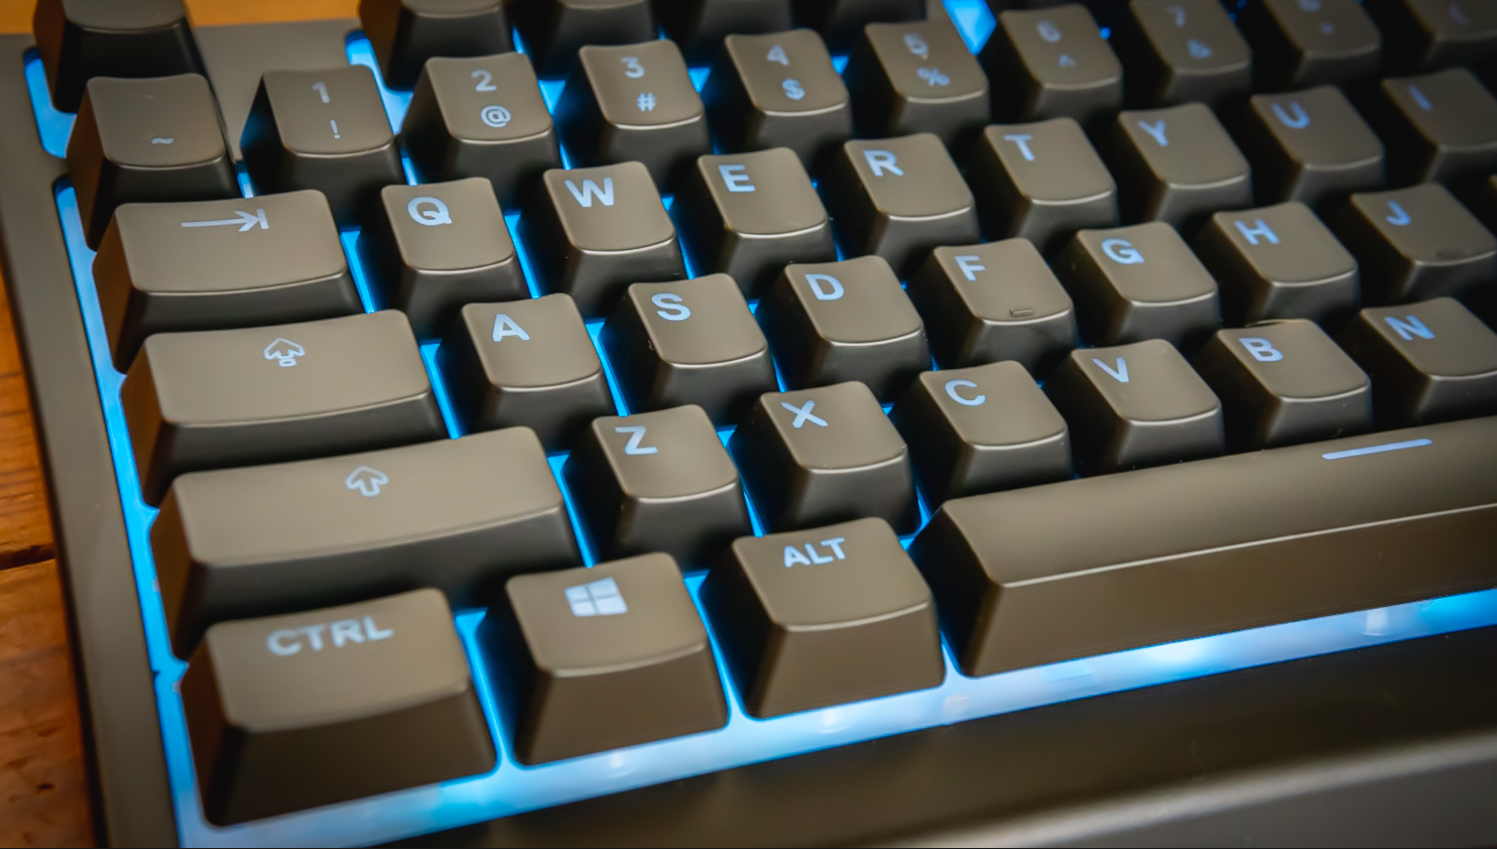 Hardware Most More Apex Review: Less Do than for 3 Tom\'s TKL Can | SteelSeries